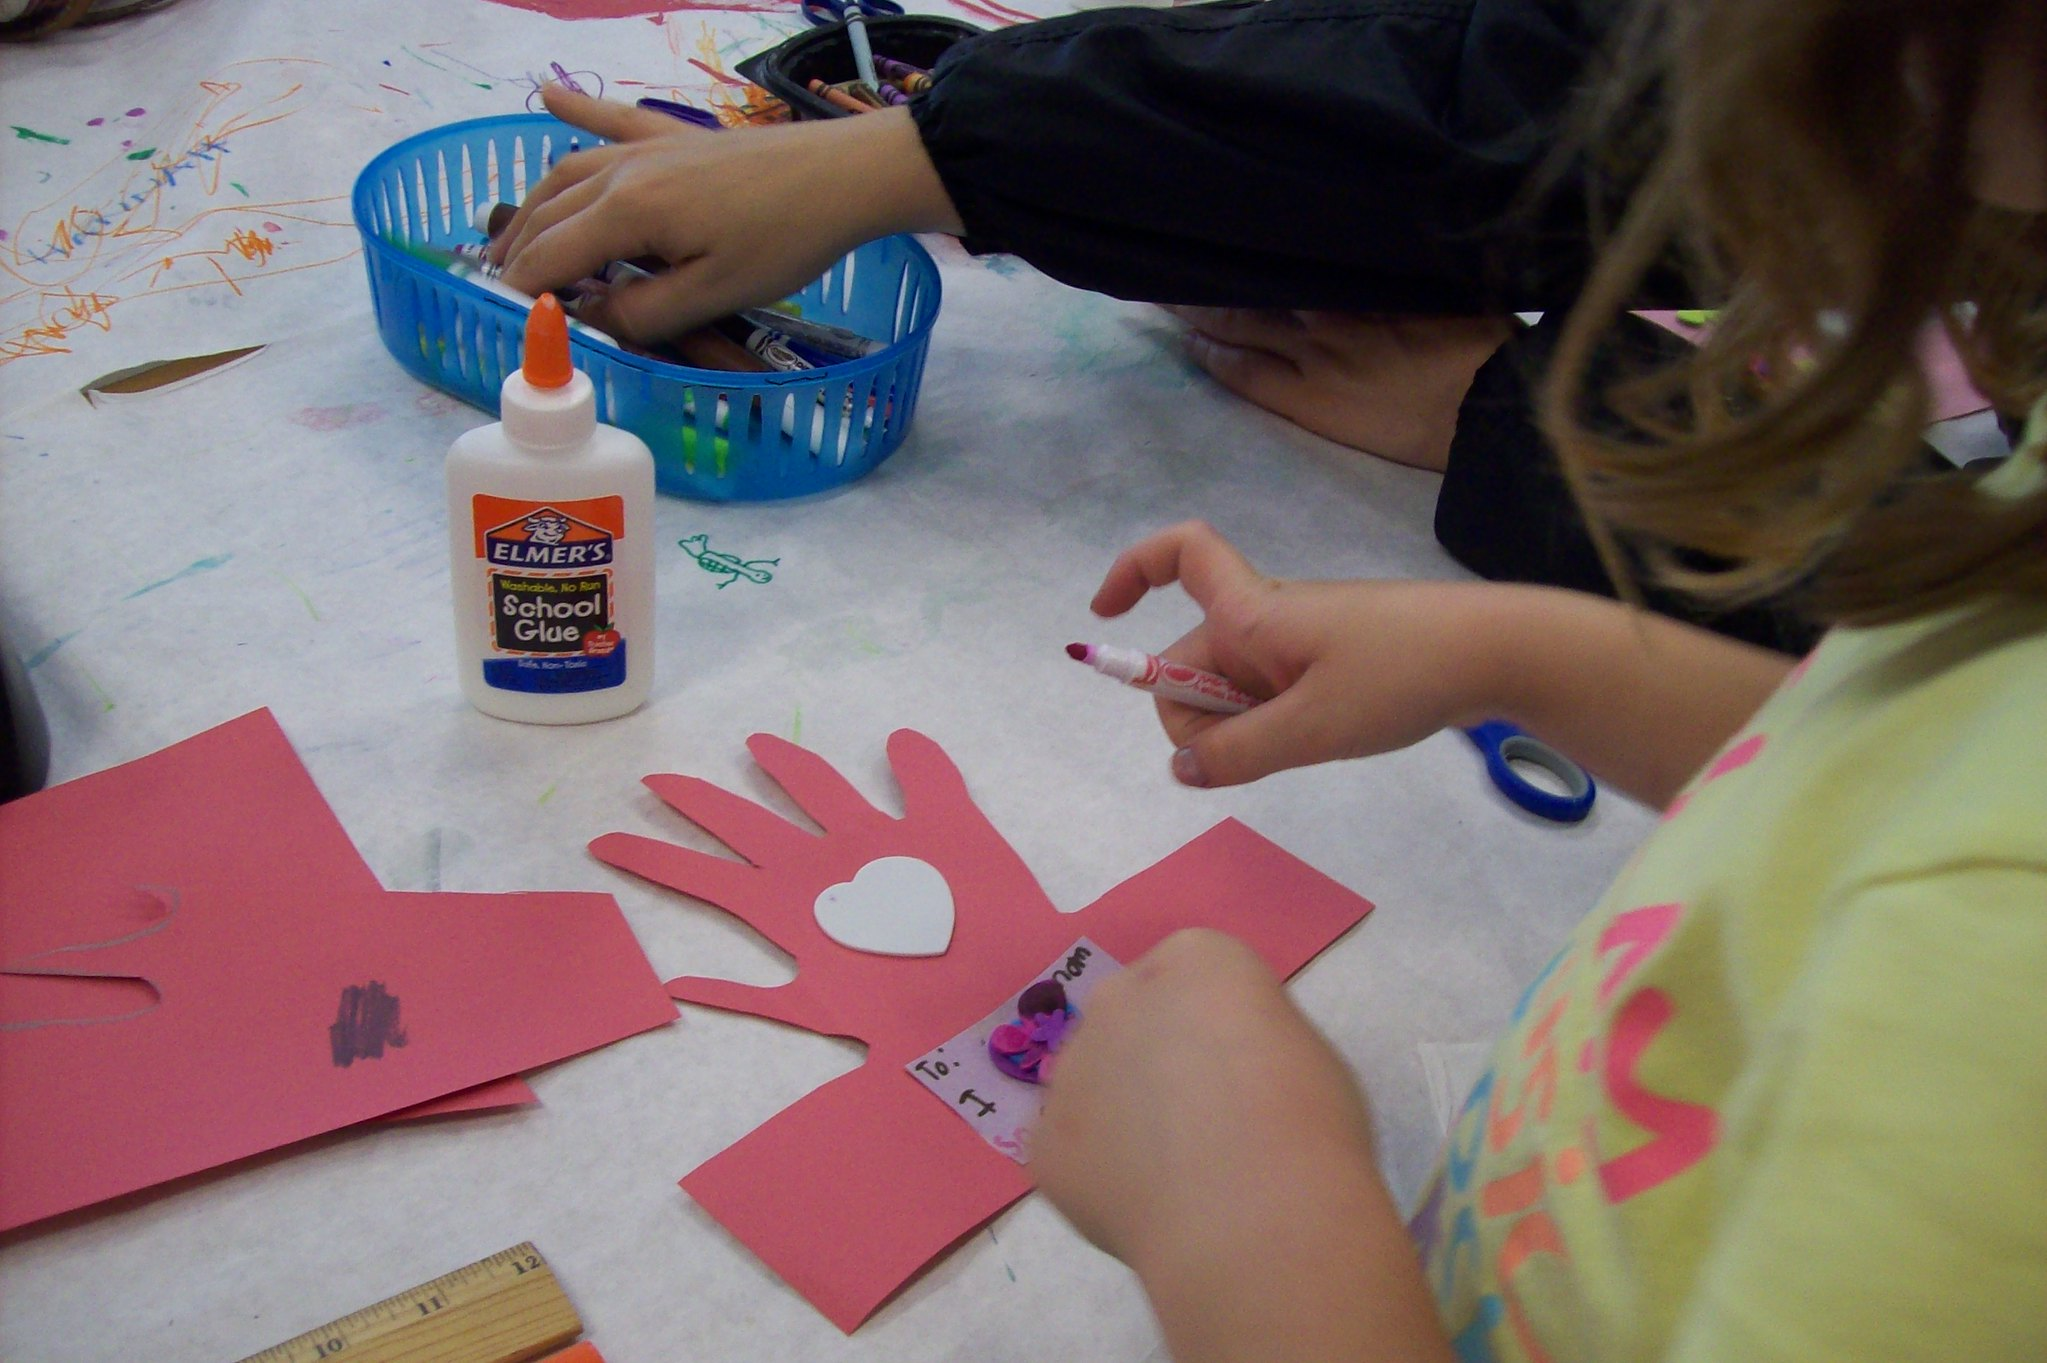 Heart arts mother's day crafts by San José Public Library on Flickr